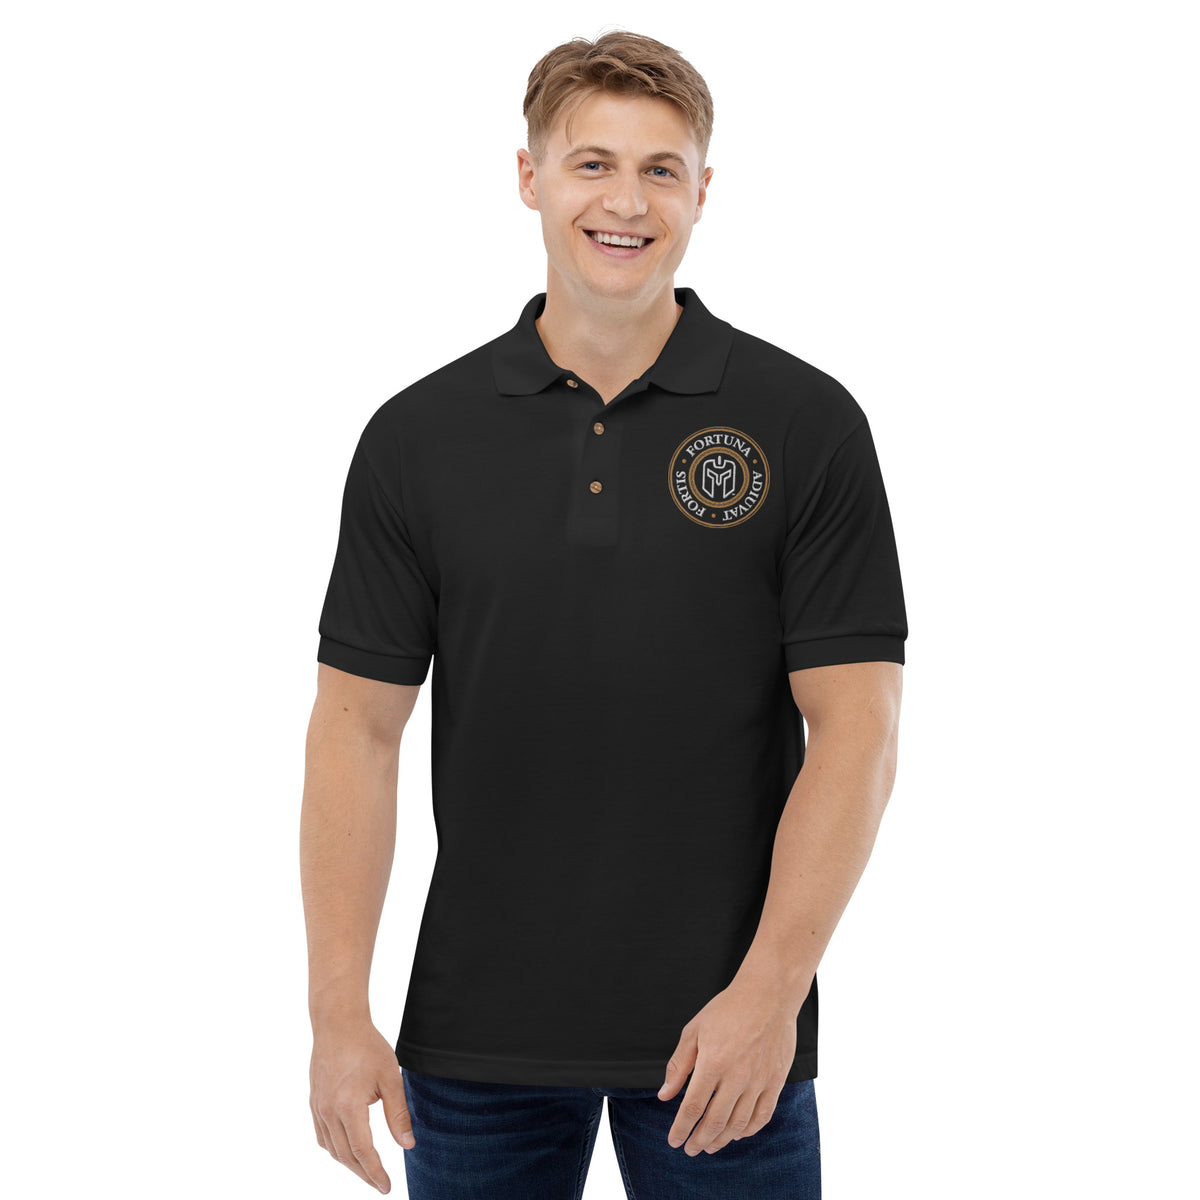 FORTIS FORTUNA ADIUVAT- Fortune Favors The Bold- Warrior  Embroidered Polo Shirt